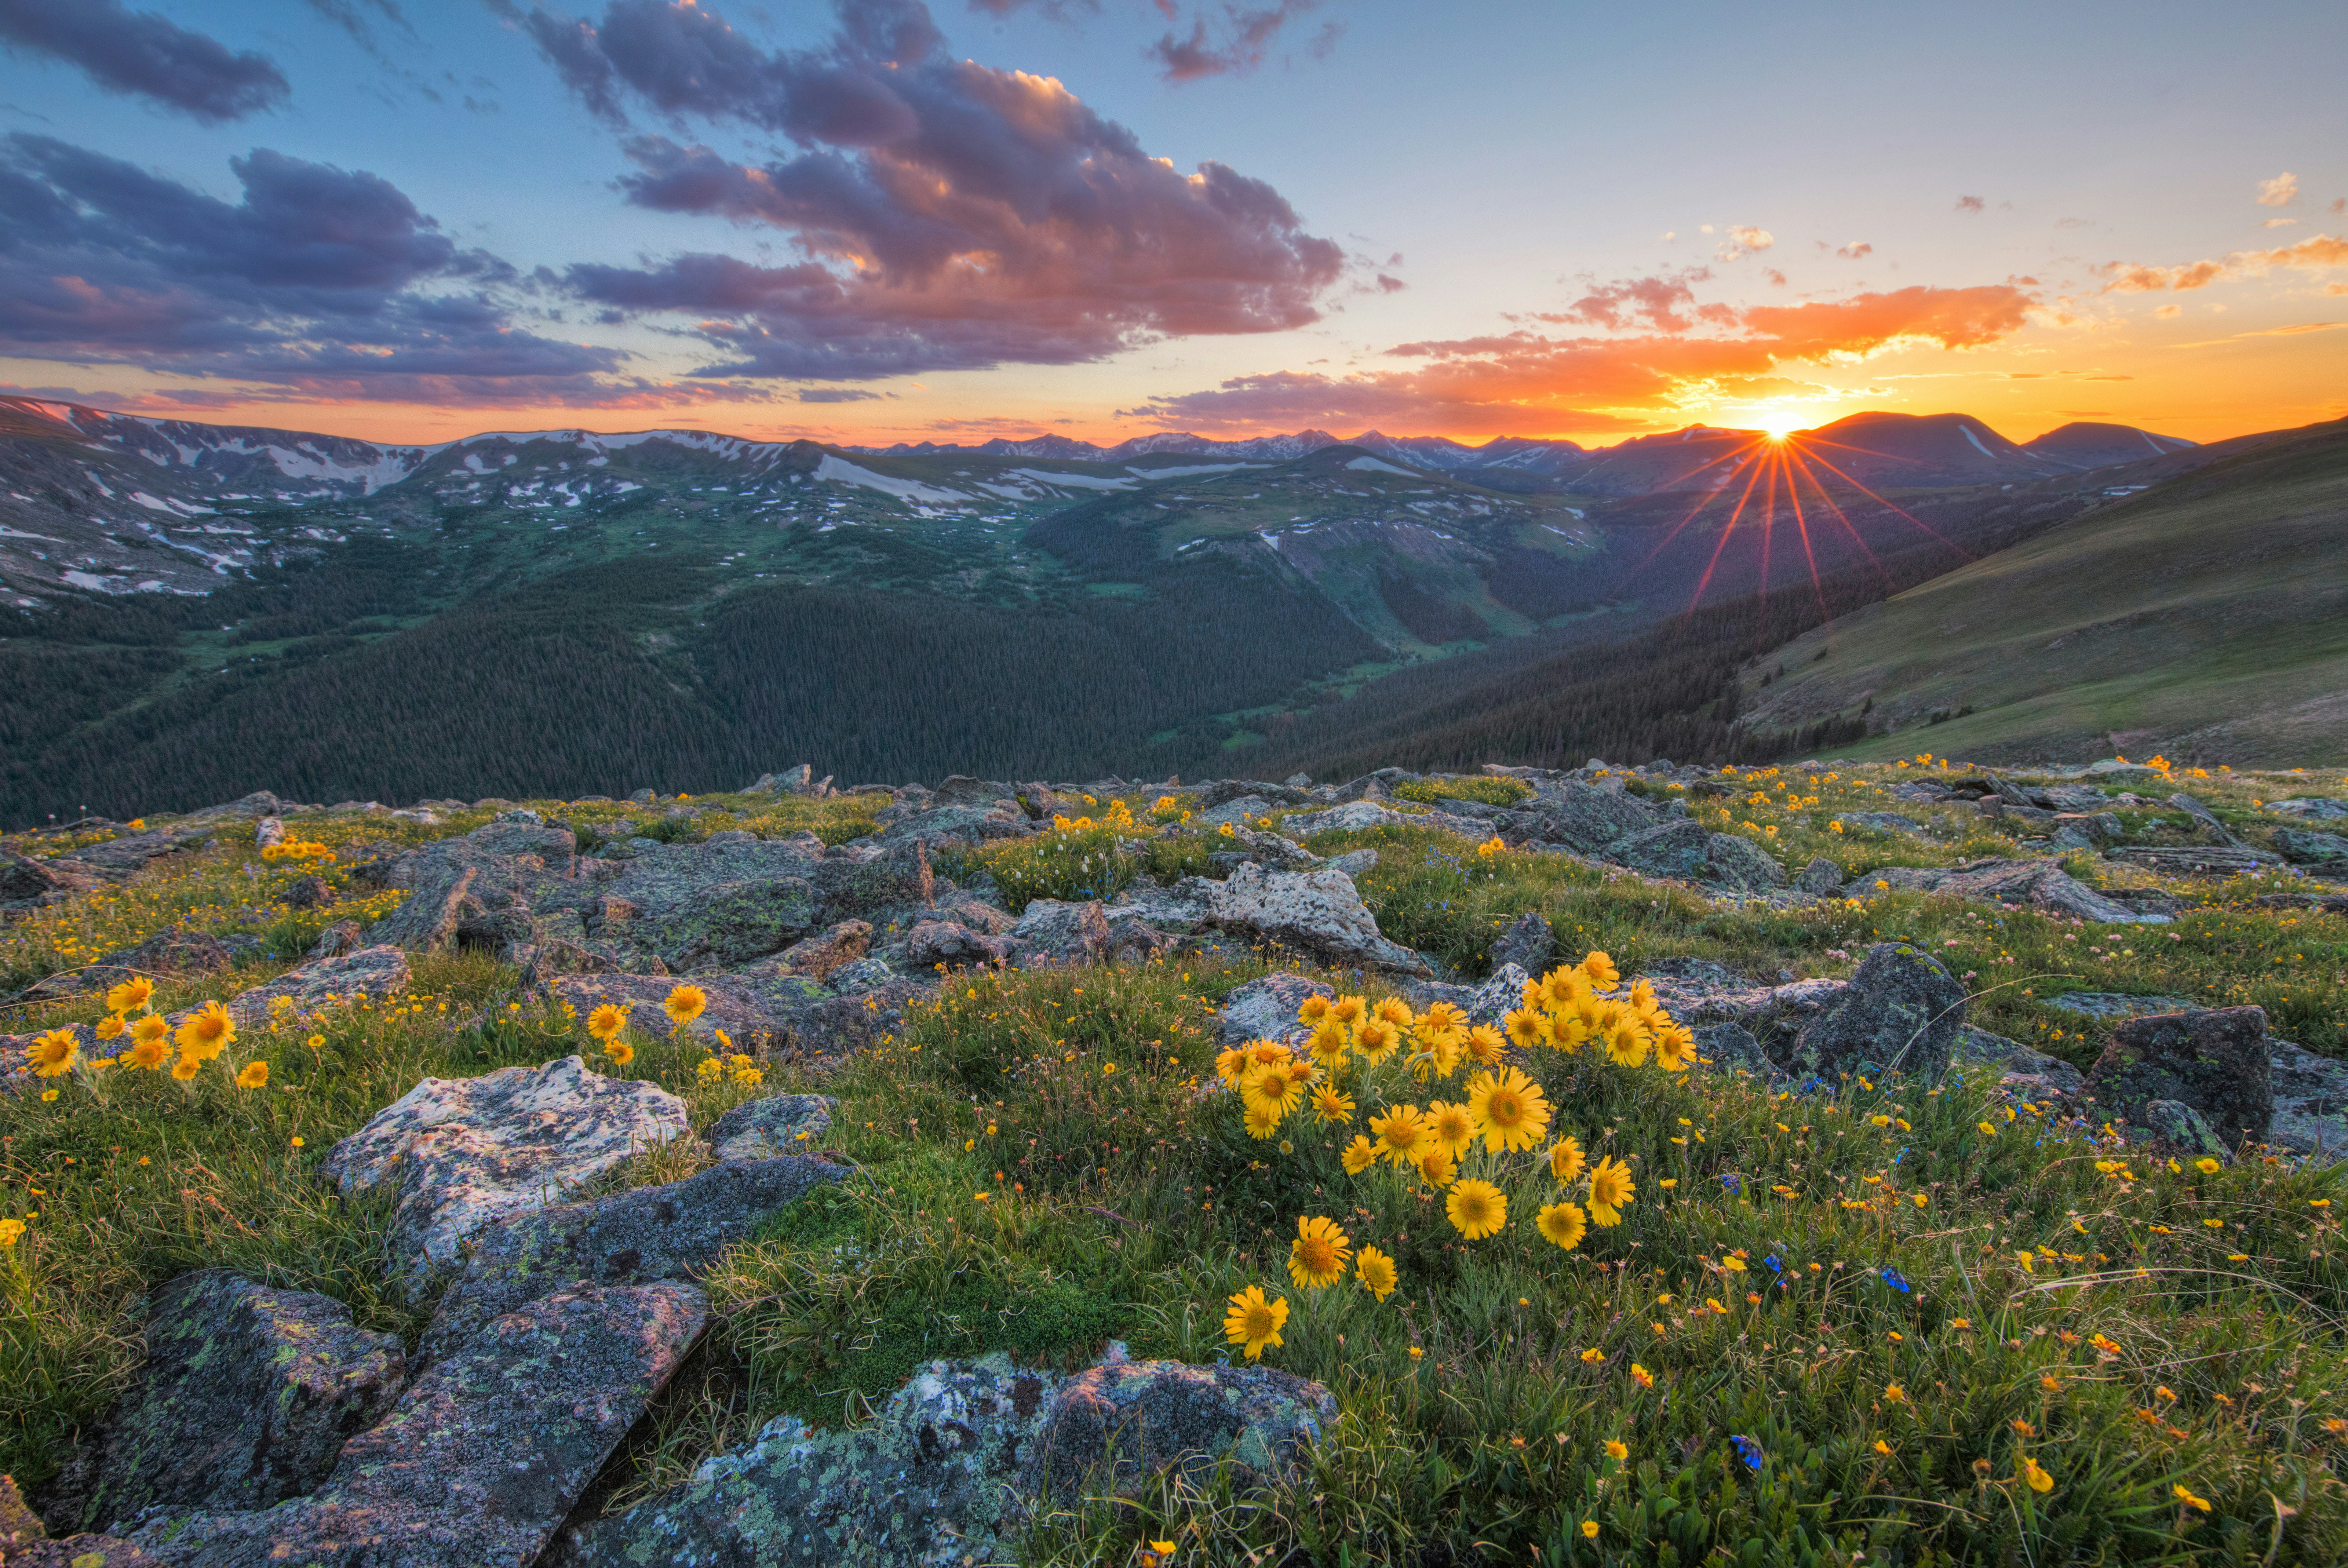 Yellow wildflowers on a mountain peak, with a setting sun in the distance